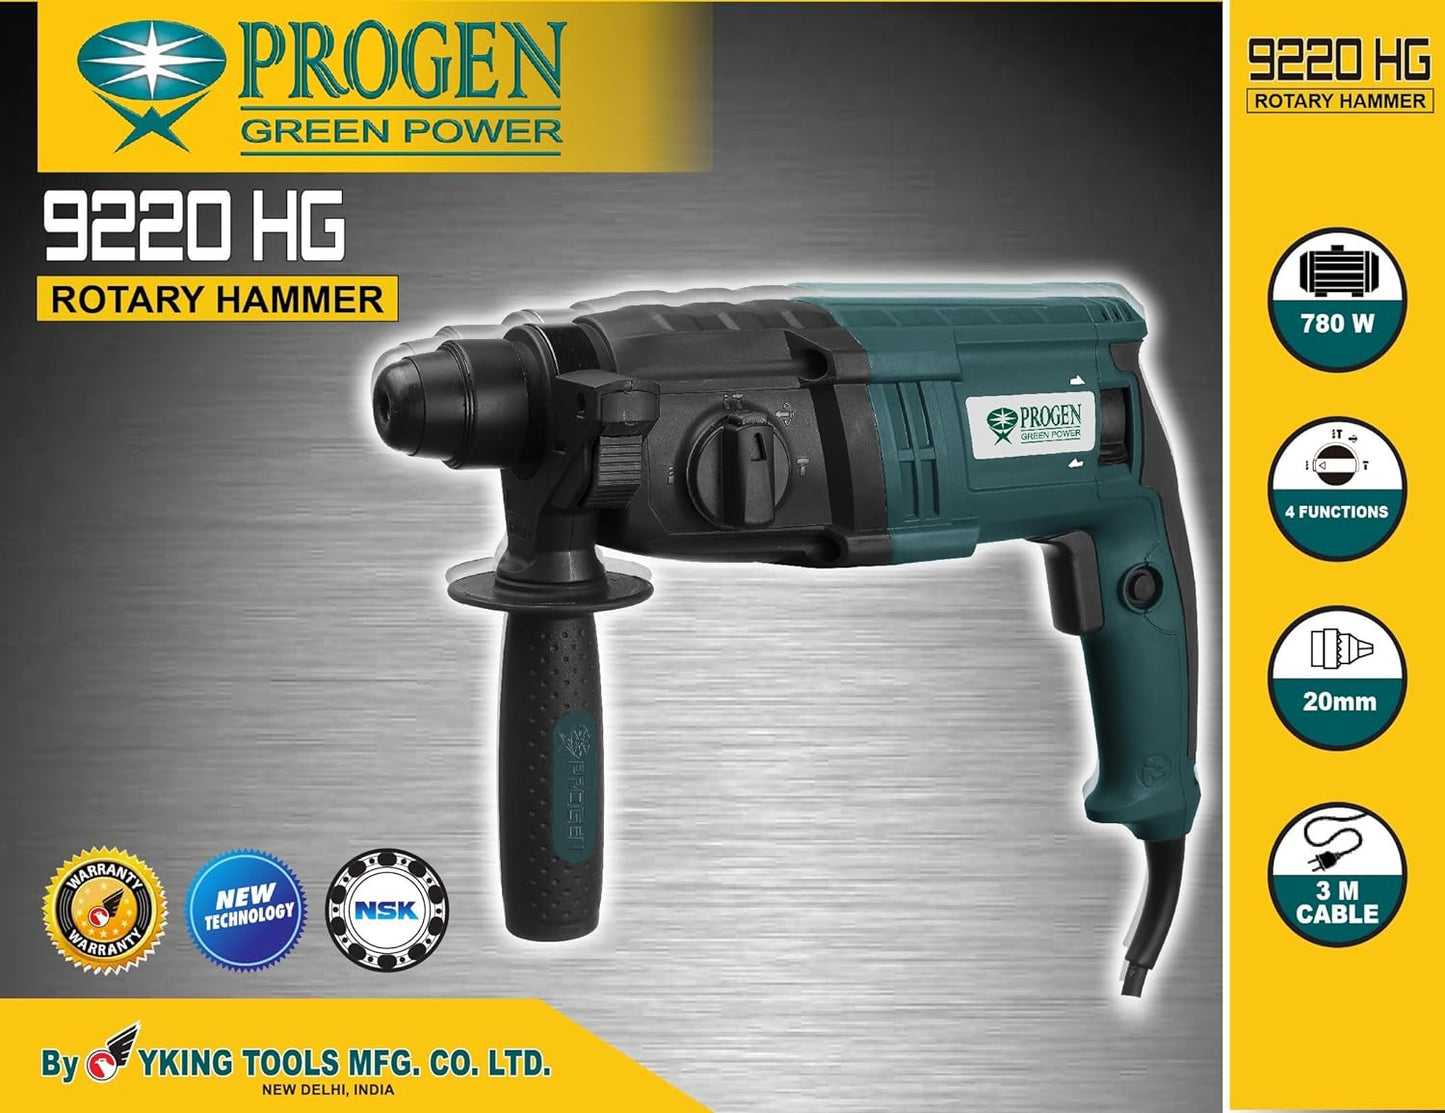 PROGEN 9220-HG, 20mm, 780W SDS Plus Type Shank Variable Speed Reversible 4 Functions Rotary Hammer Drill with 3 Bits (3900 bpm, 2000 Rpm)